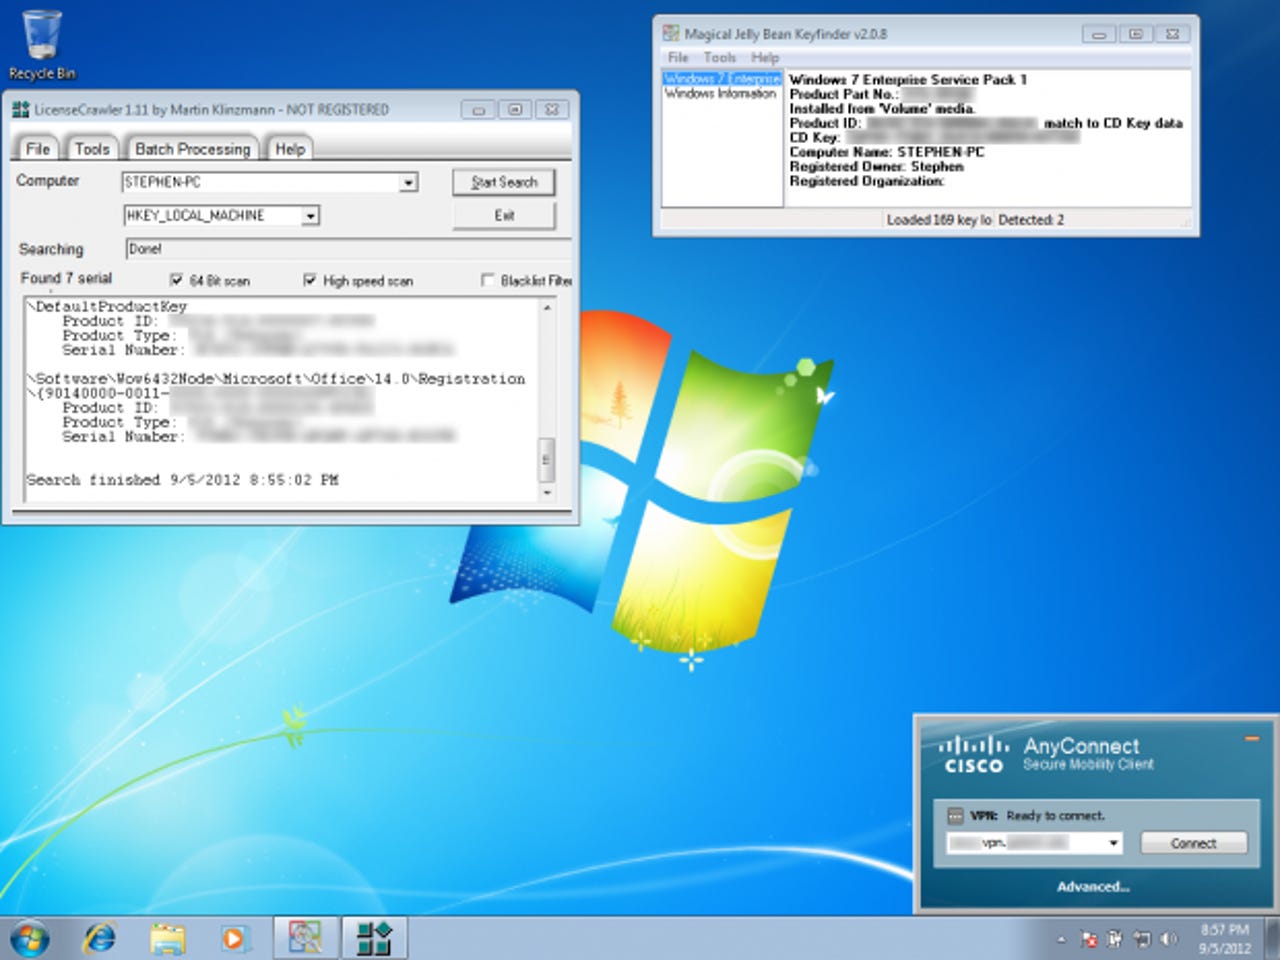 Windows 7 Enterprise SP1 and Office 2010 licenses, as well as VPN specs